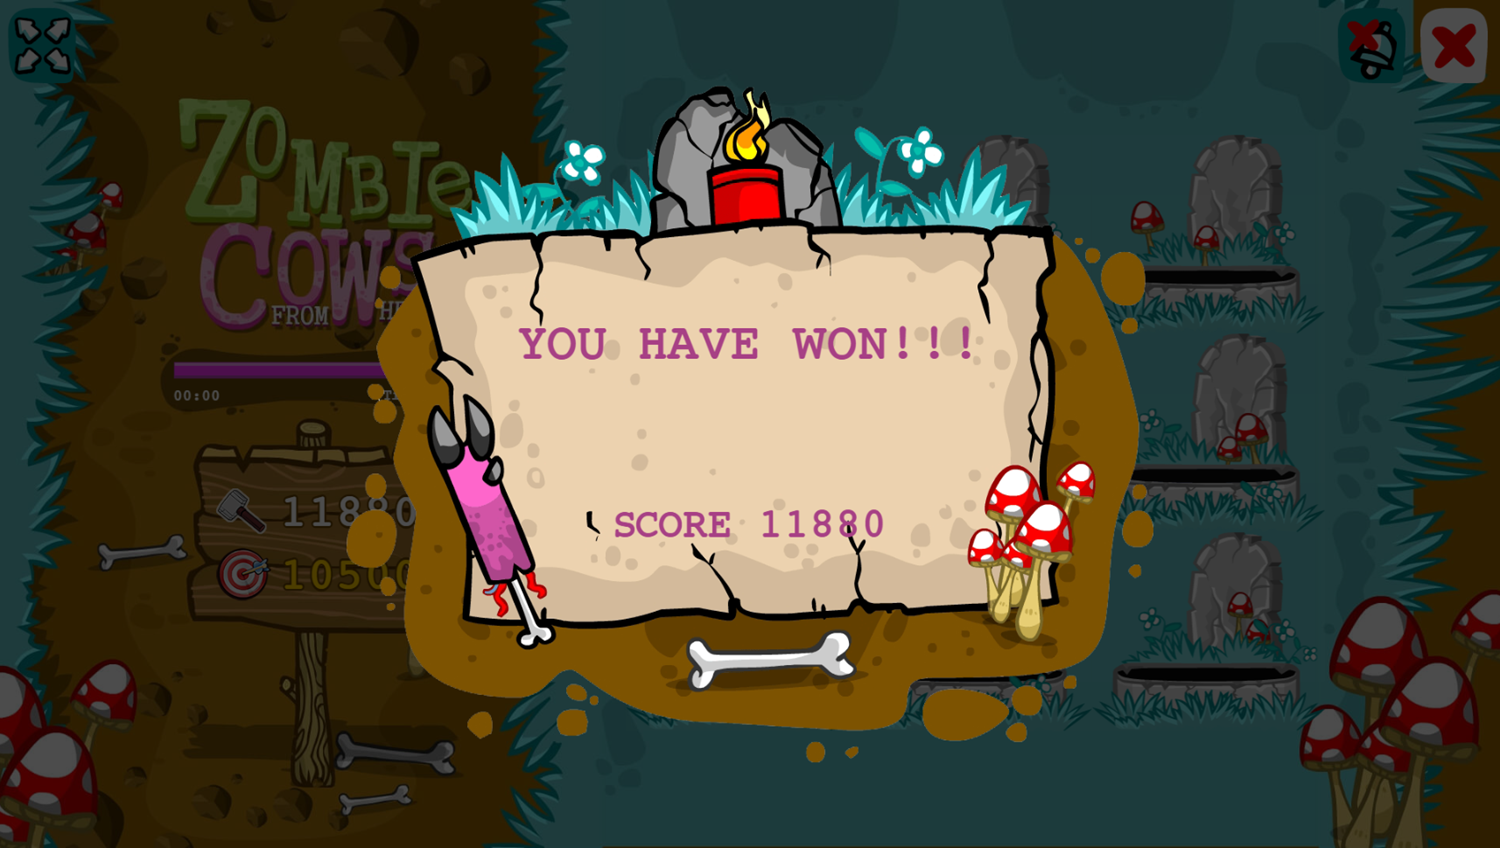 Zombie Cows From Hell Game Score Screenshot.